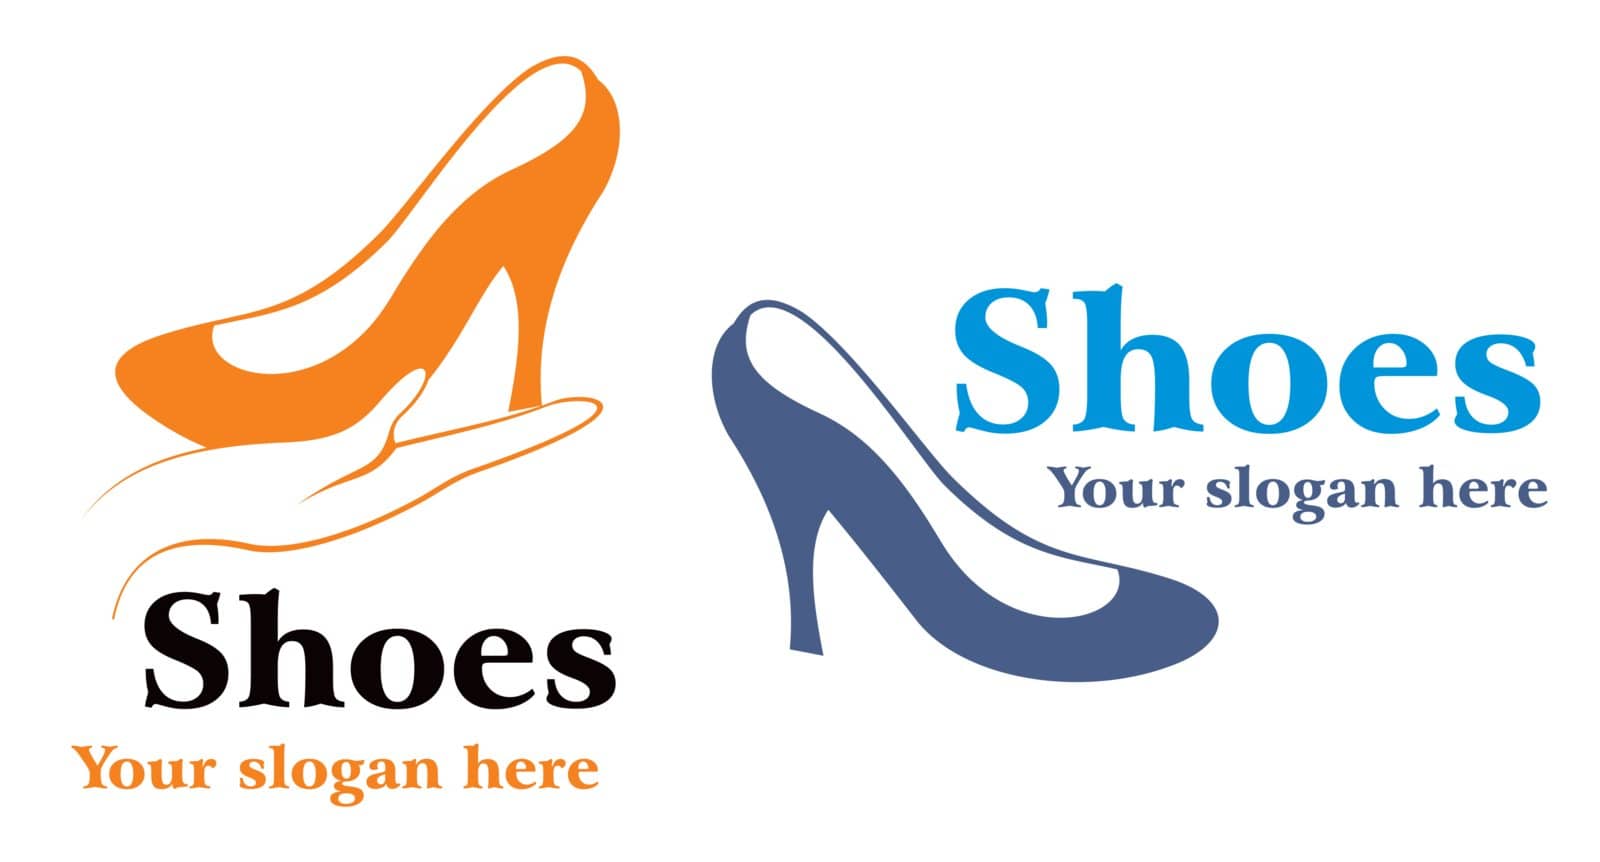 Design symbol for shoes industry on white